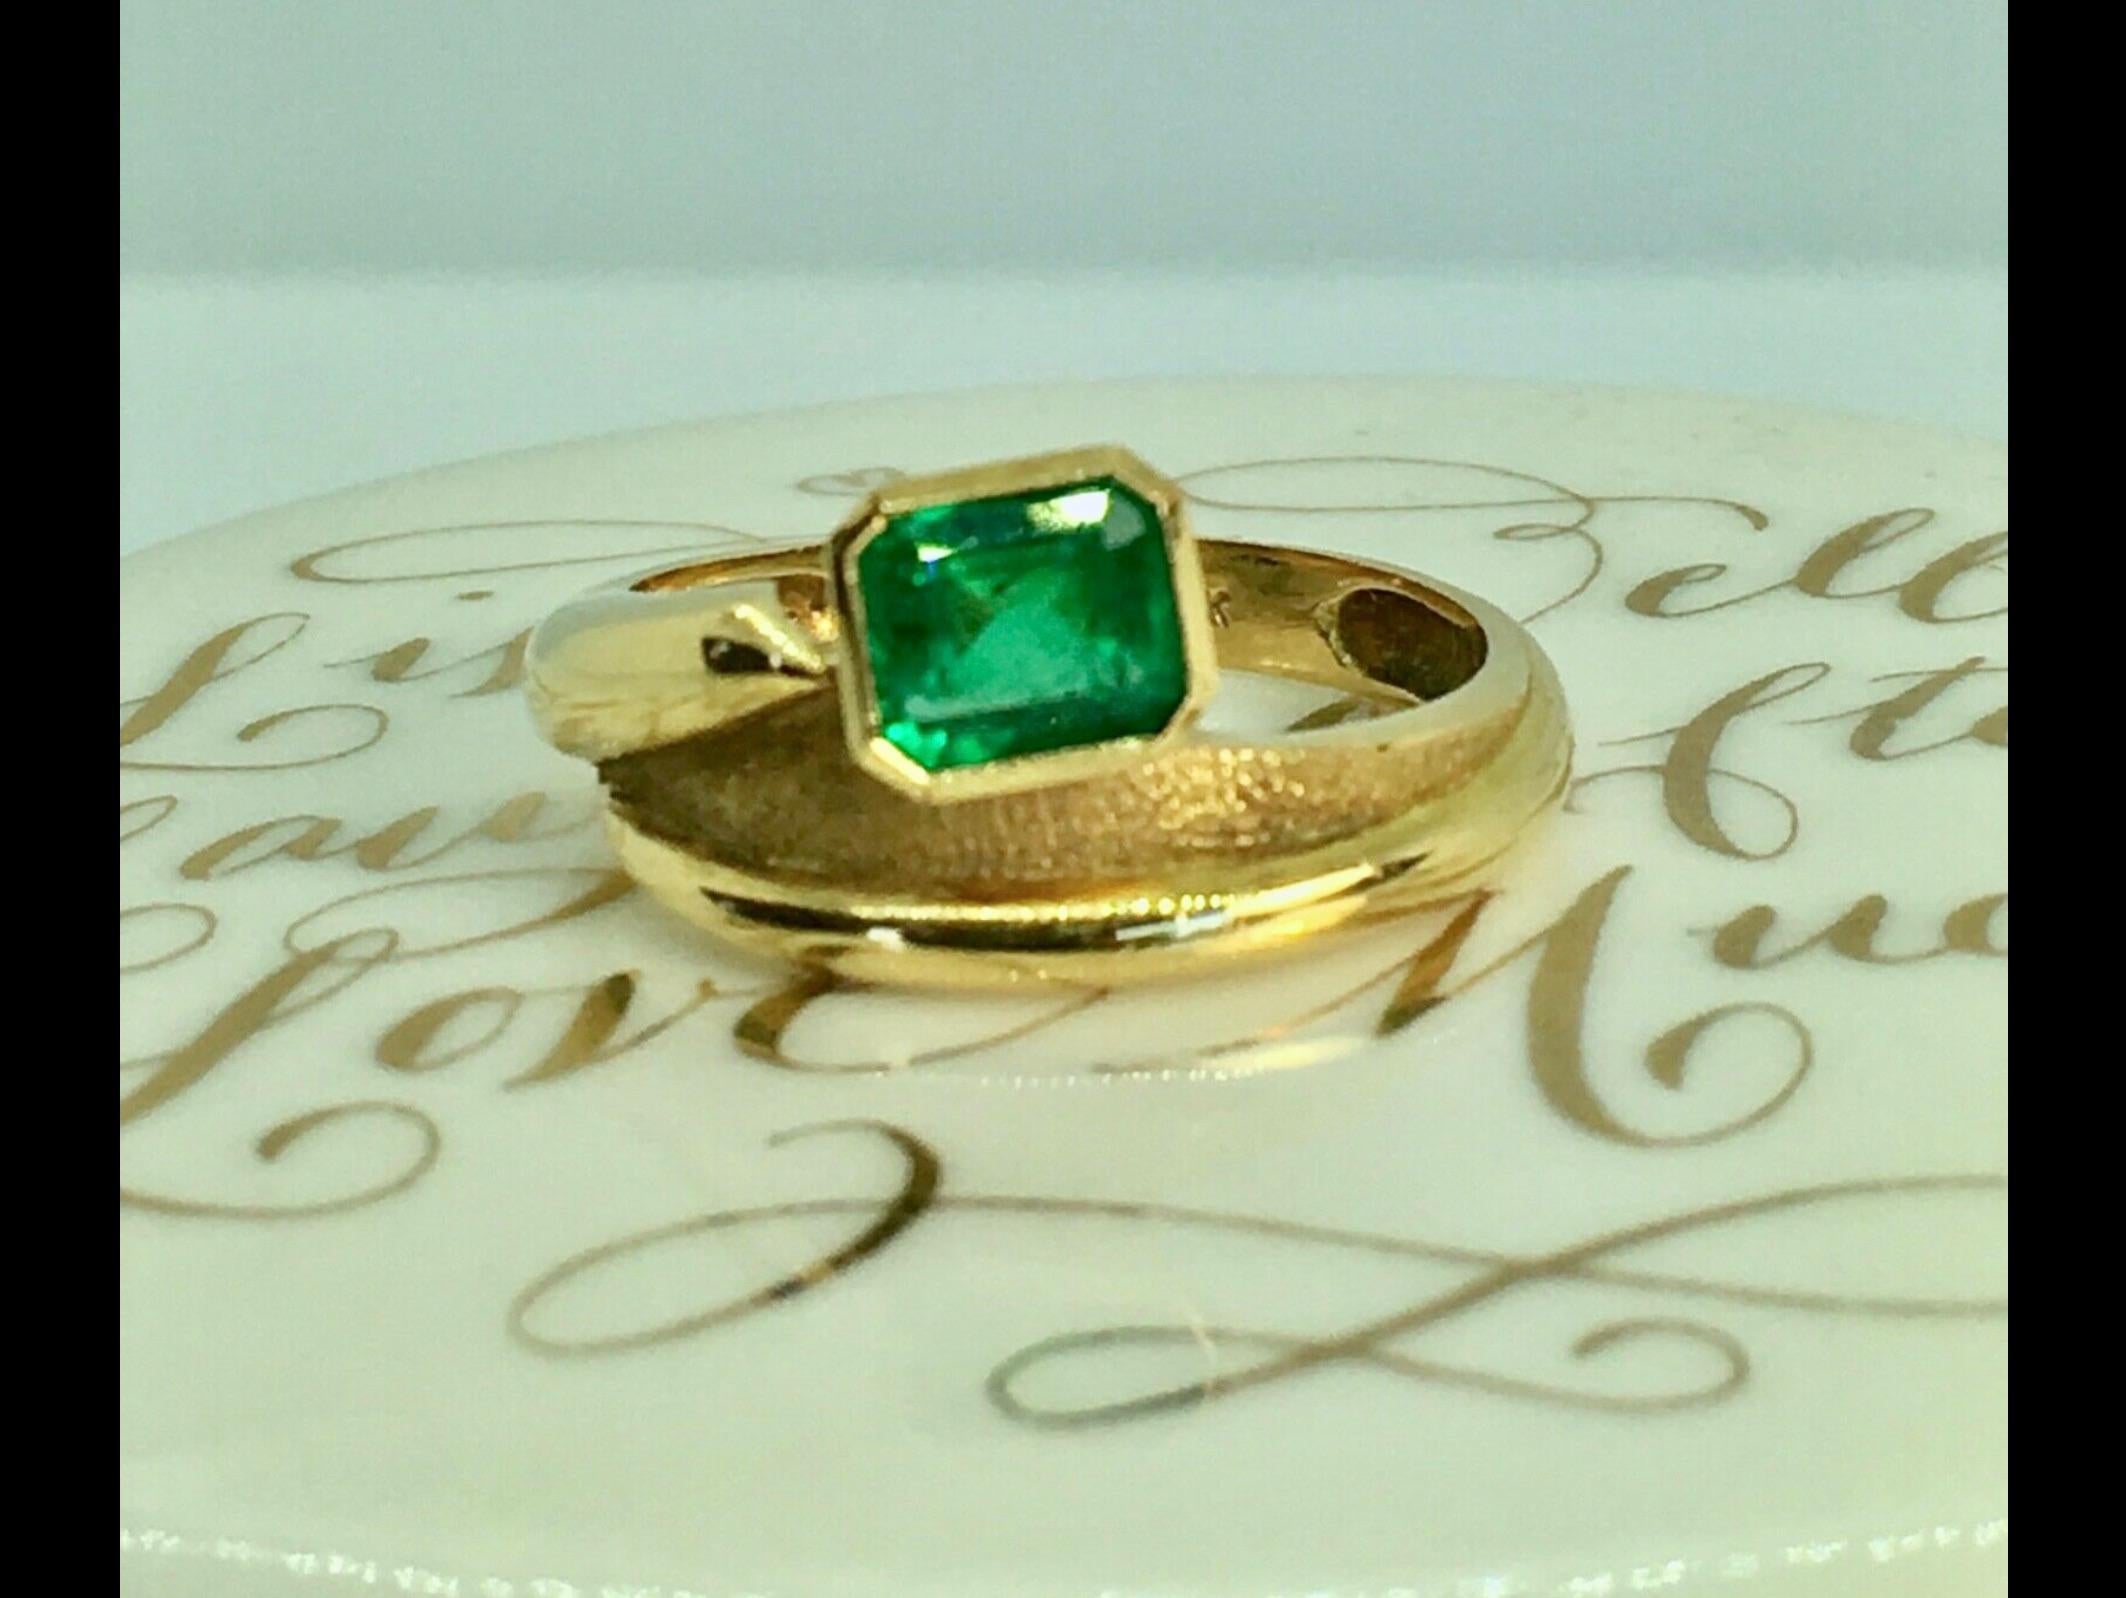 Estate Solitaire Ring Fine Natural Colombian Emerald Emerald Cut 0.80 Carat
Weight 4.5g
Vivid Medium Dark Green
Size 6
In Excelelnt condition